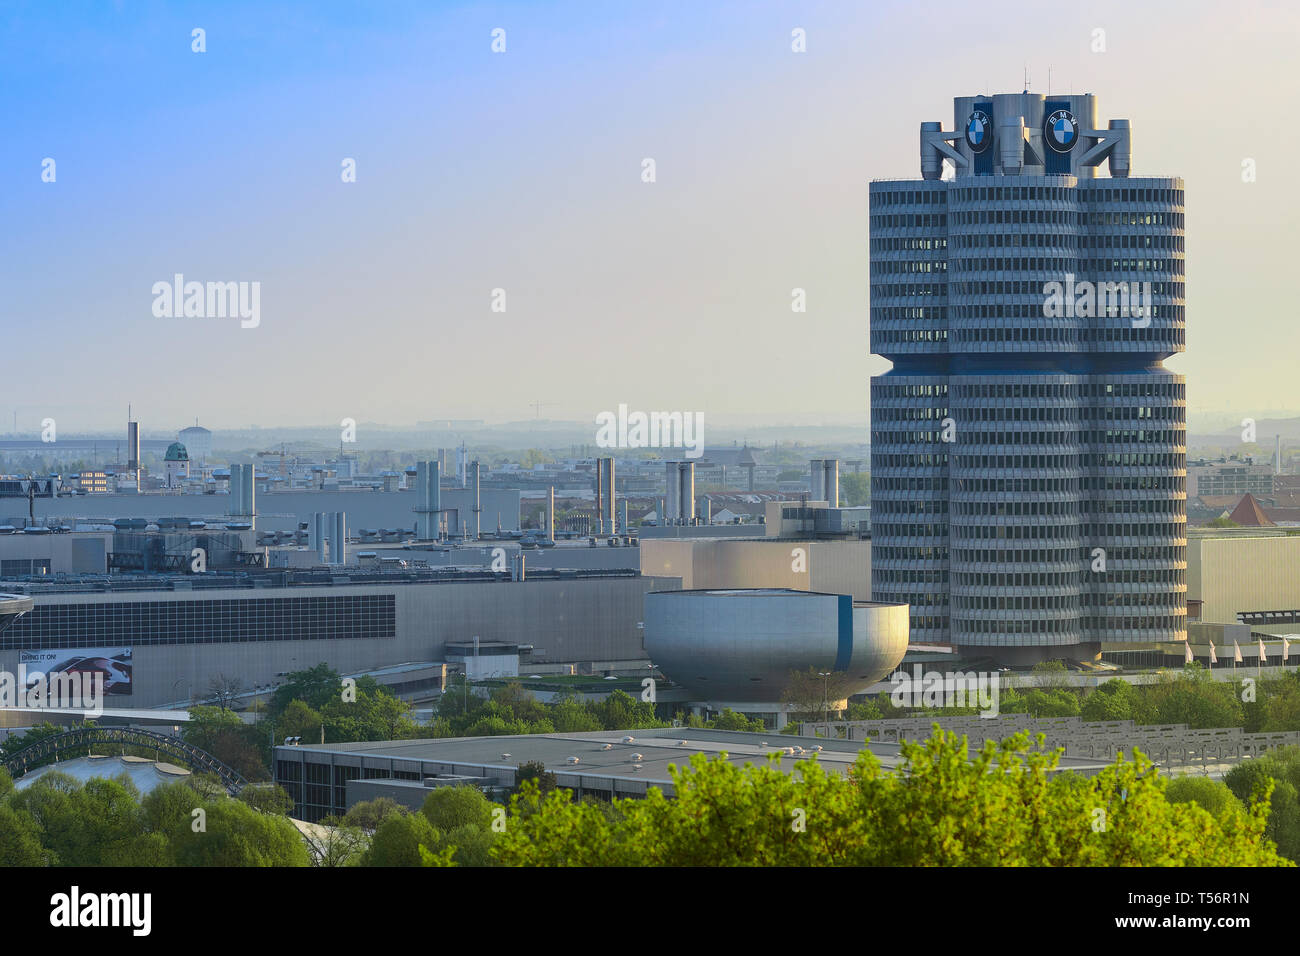 Munich, Germany - April 22, 2018: BMW Headquarters office tower, manufacturing plants and industrial facility of Bavarian automaker. Stock Photo